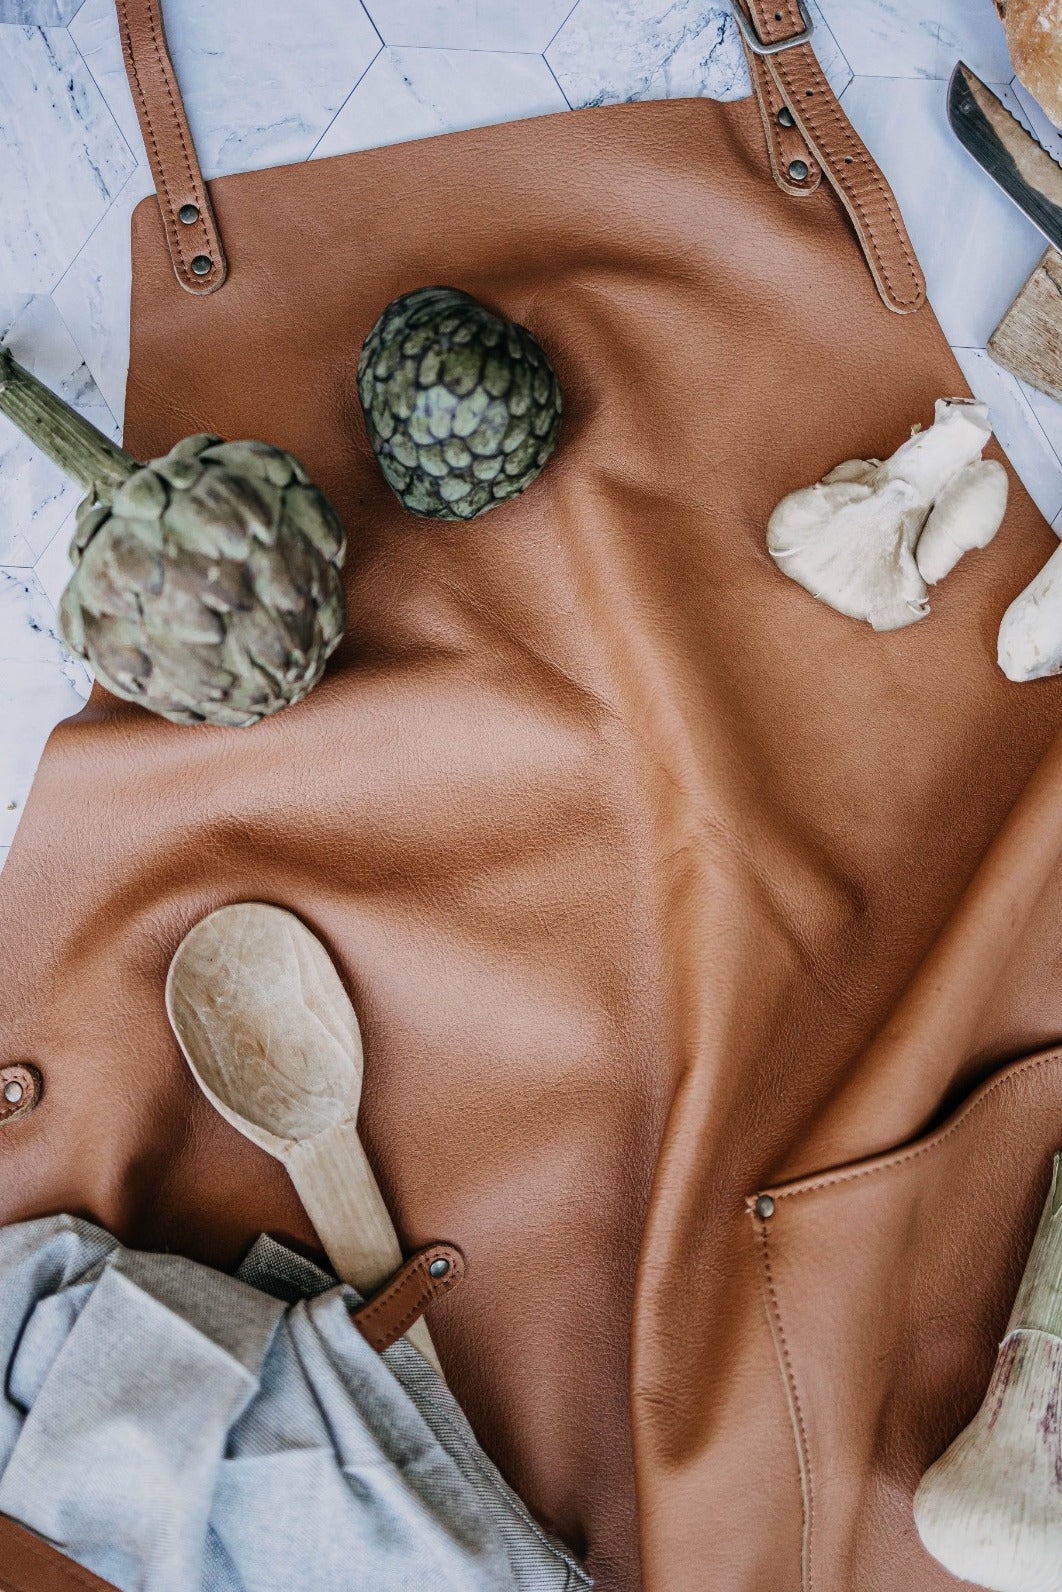 L'Chaim Leather Cooking Apron "The Identity"